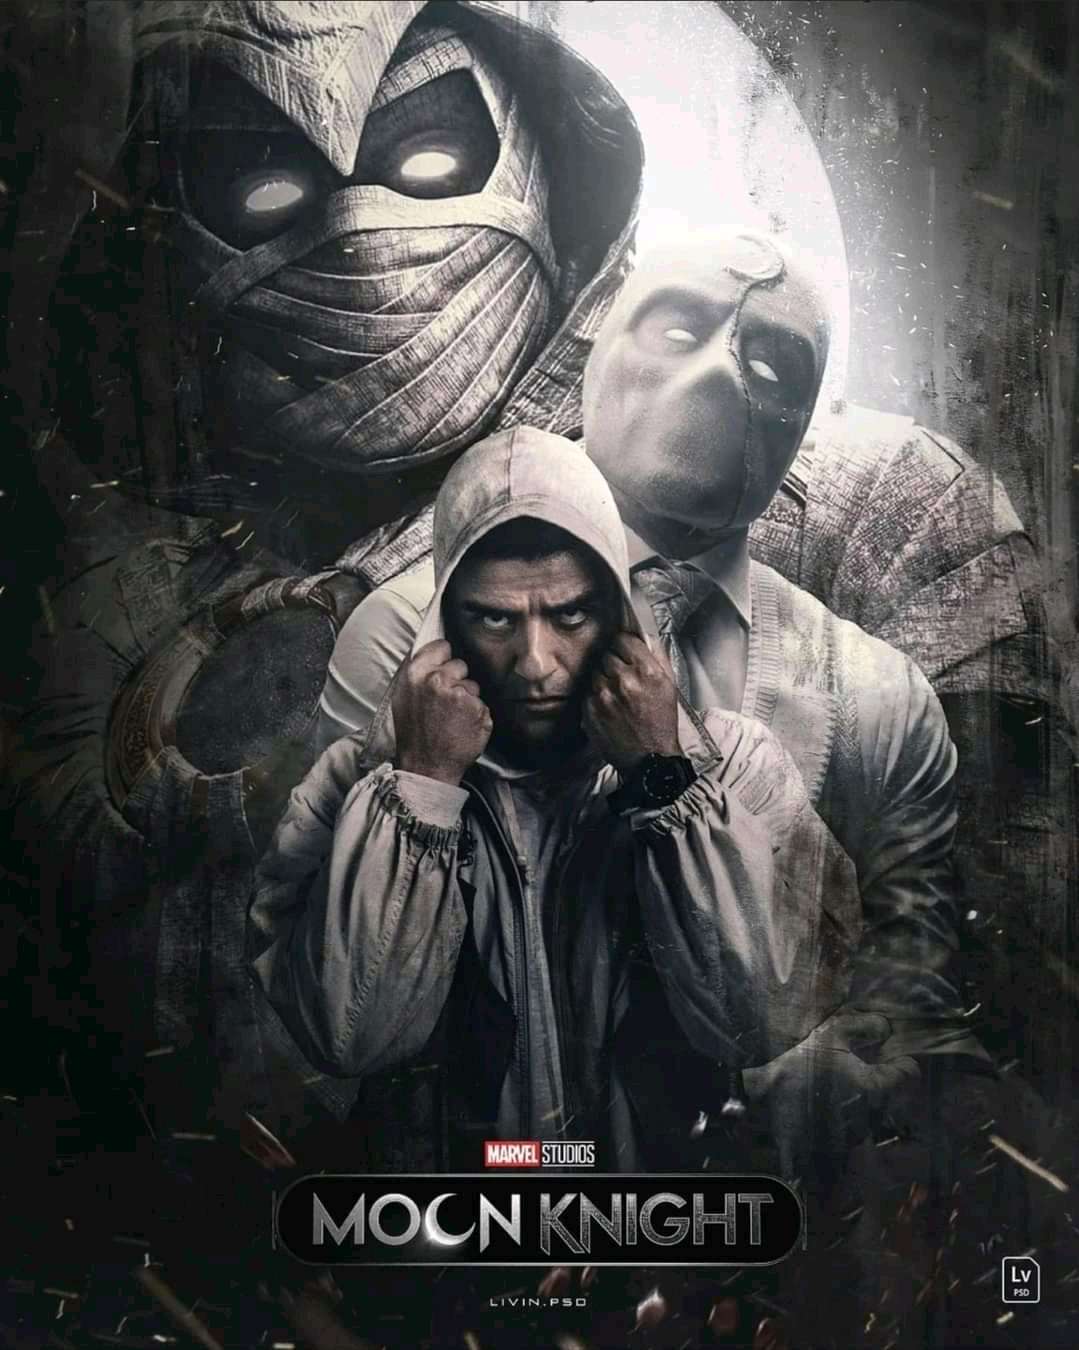 Moon Knight review - Is Oscar Isaac's Marvel show worth watching?